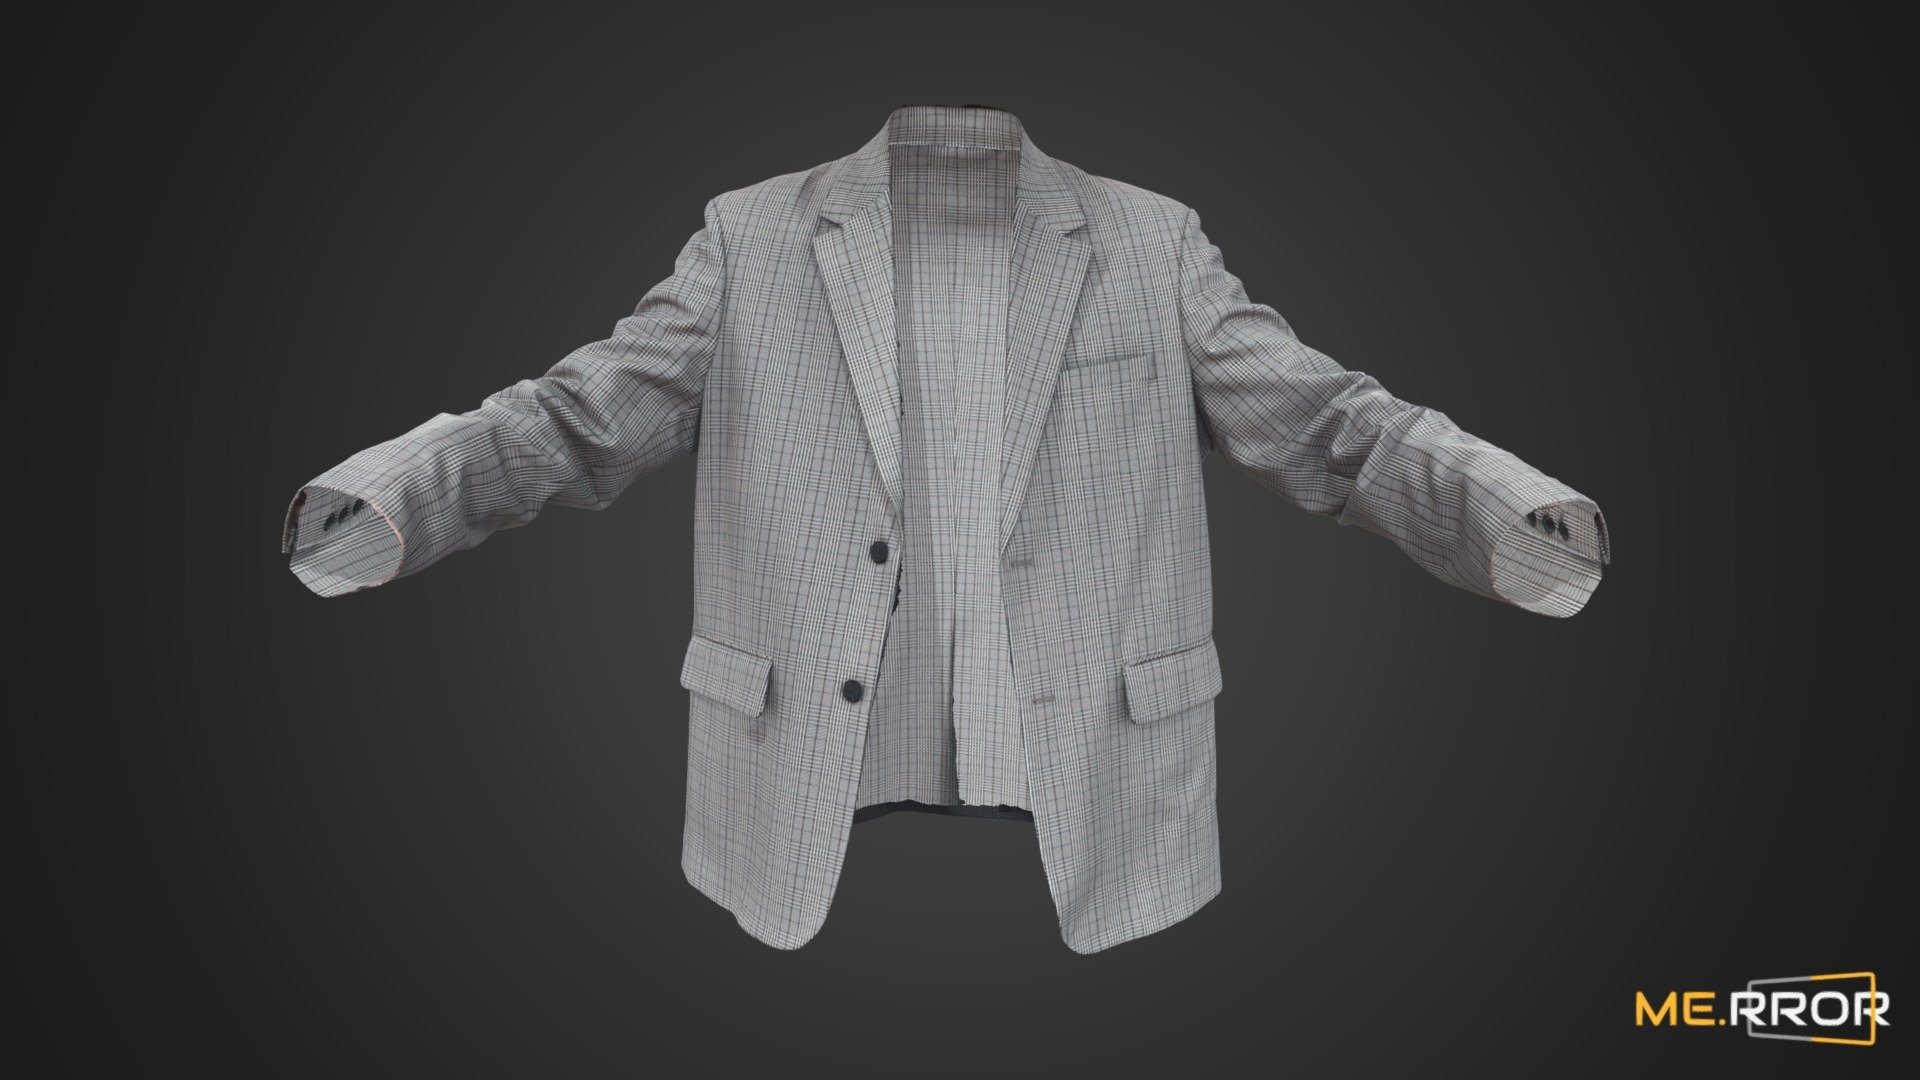 MERROR is a 3D Content PLATFORM which introduces various Asian assets to the 3D world


3DScanning #Photogrametry #ME.RROR - Checkered Jacket - Buy Royalty Free 3D model by ME.RROR (@merror) 3d model